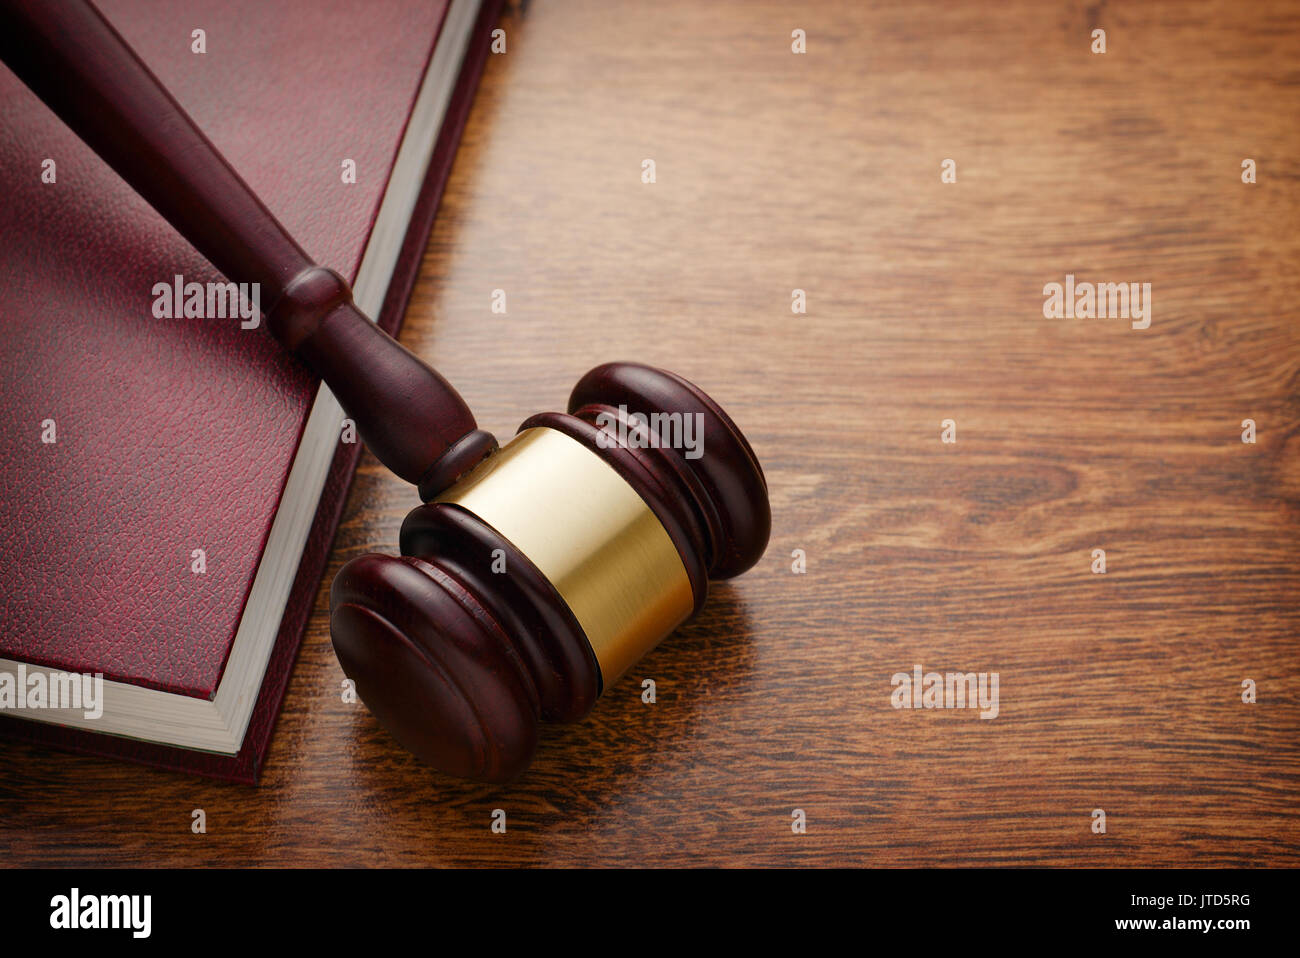 Close up Brown Wooden Gavel and Maroon Book on Top of Wooden Table, Emphasizing Legal or Law Concept Stock Photo